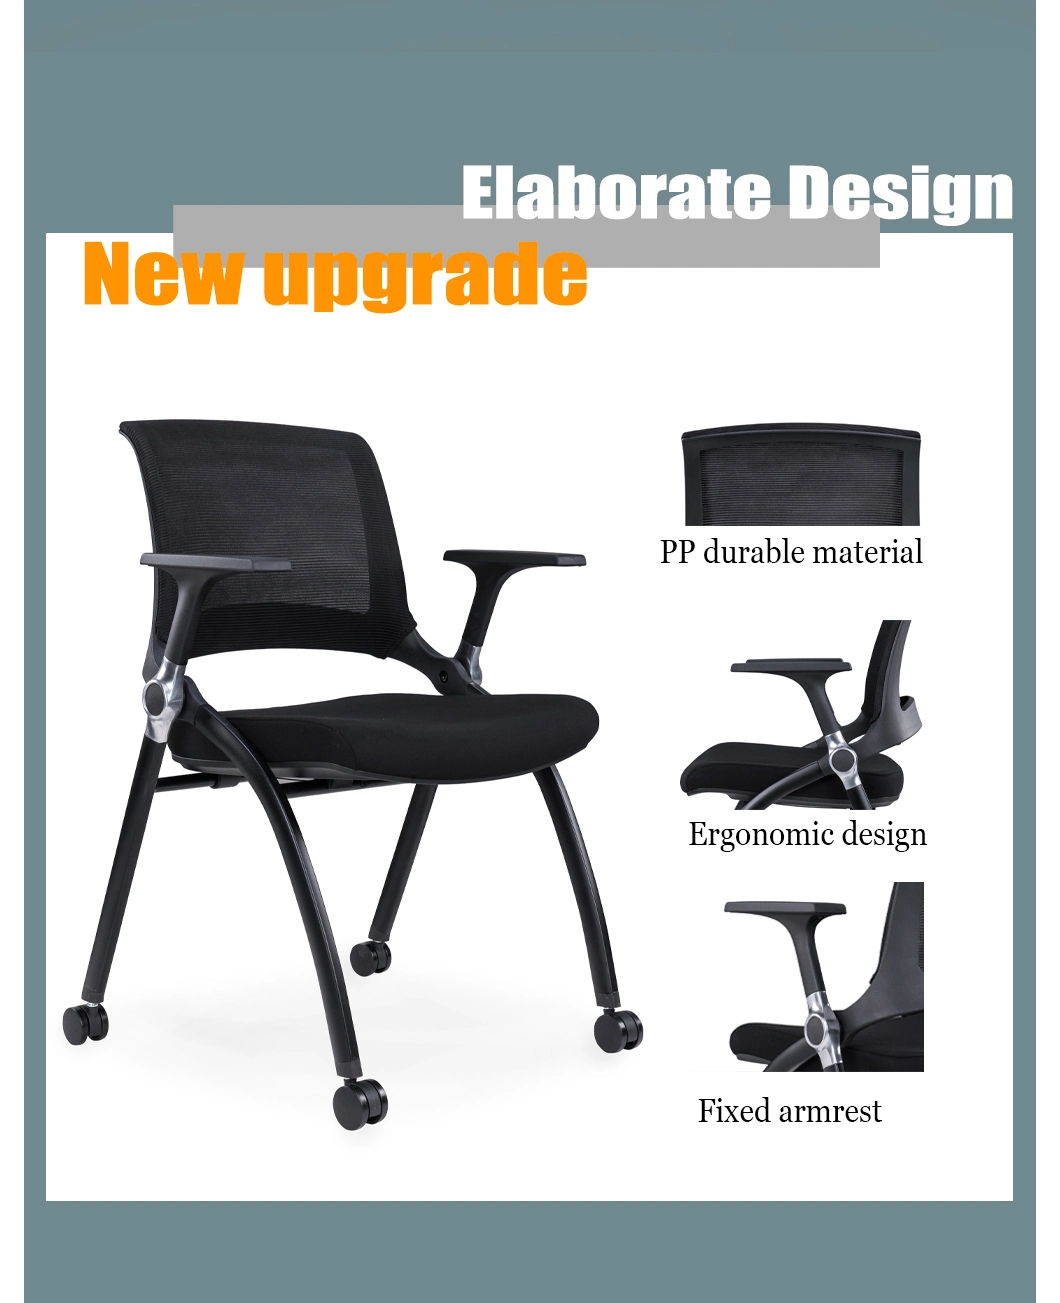 Wholesale Modern Mesh Office Chair with Armrest Folding Conference Training Chair for Meeting Room, School, Workshop